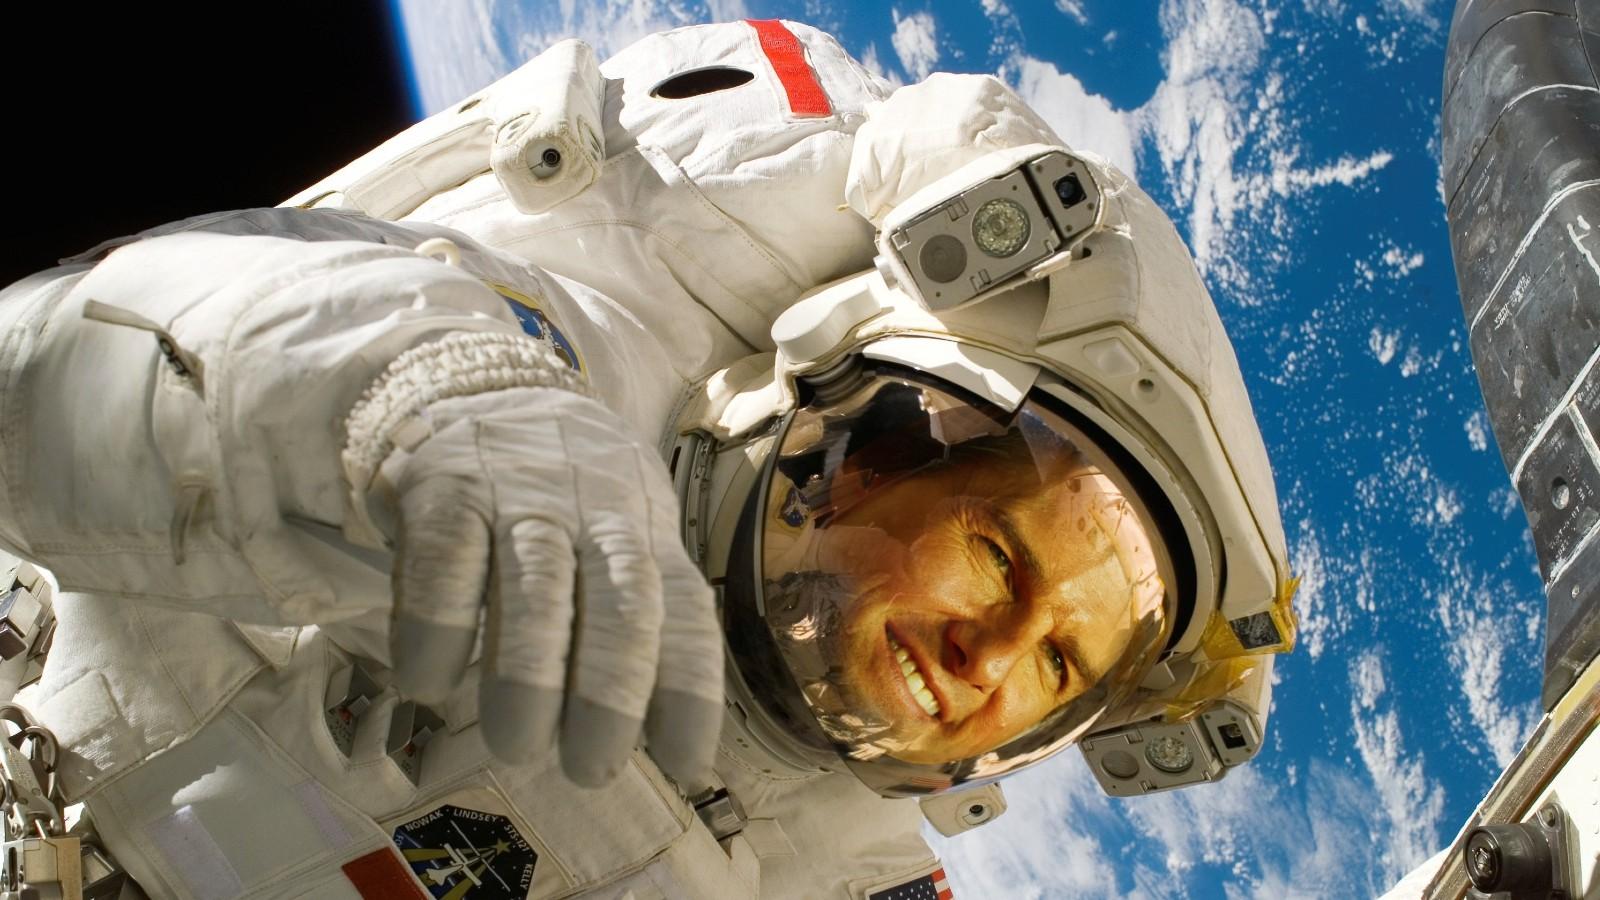 Tom Cruise in an astronaut suit